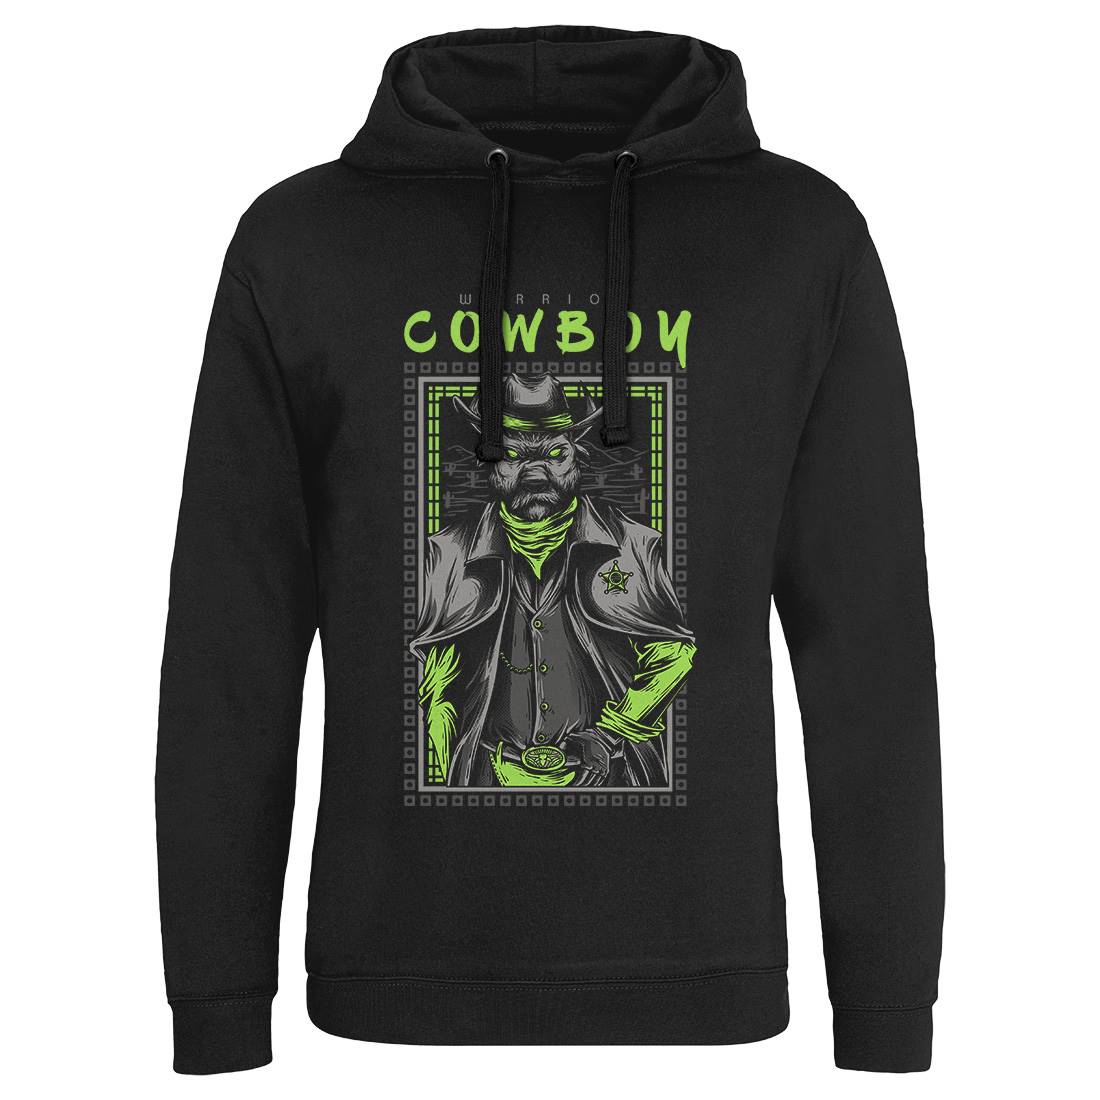 Cowboy Warrior Mens Hoodie Without Pocket American D735